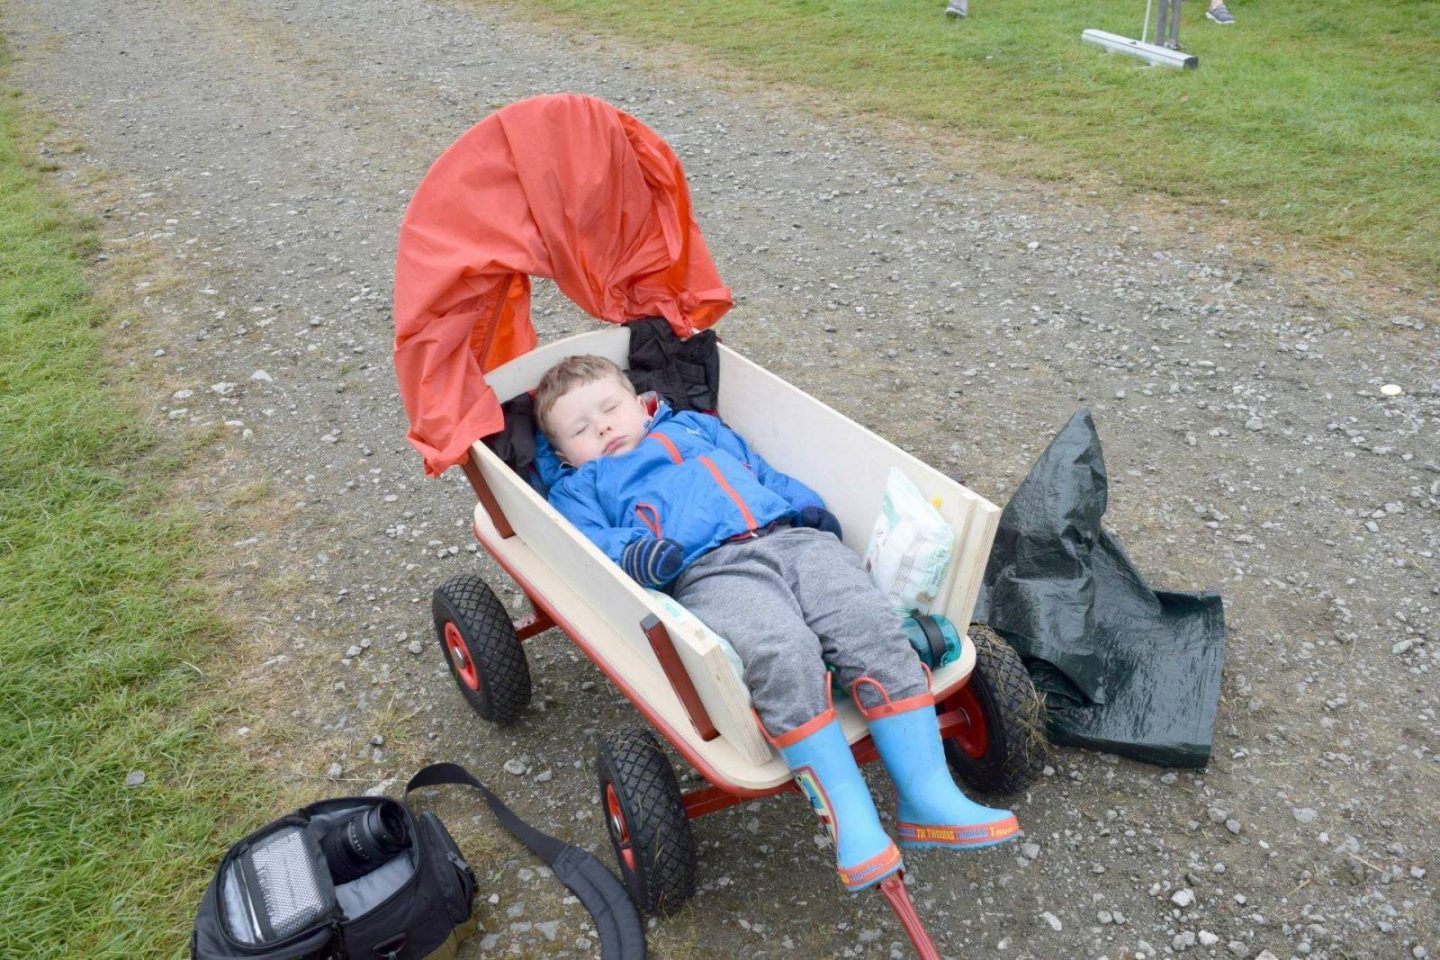 Festival wagons for kids - are they a good idea and which are the best?